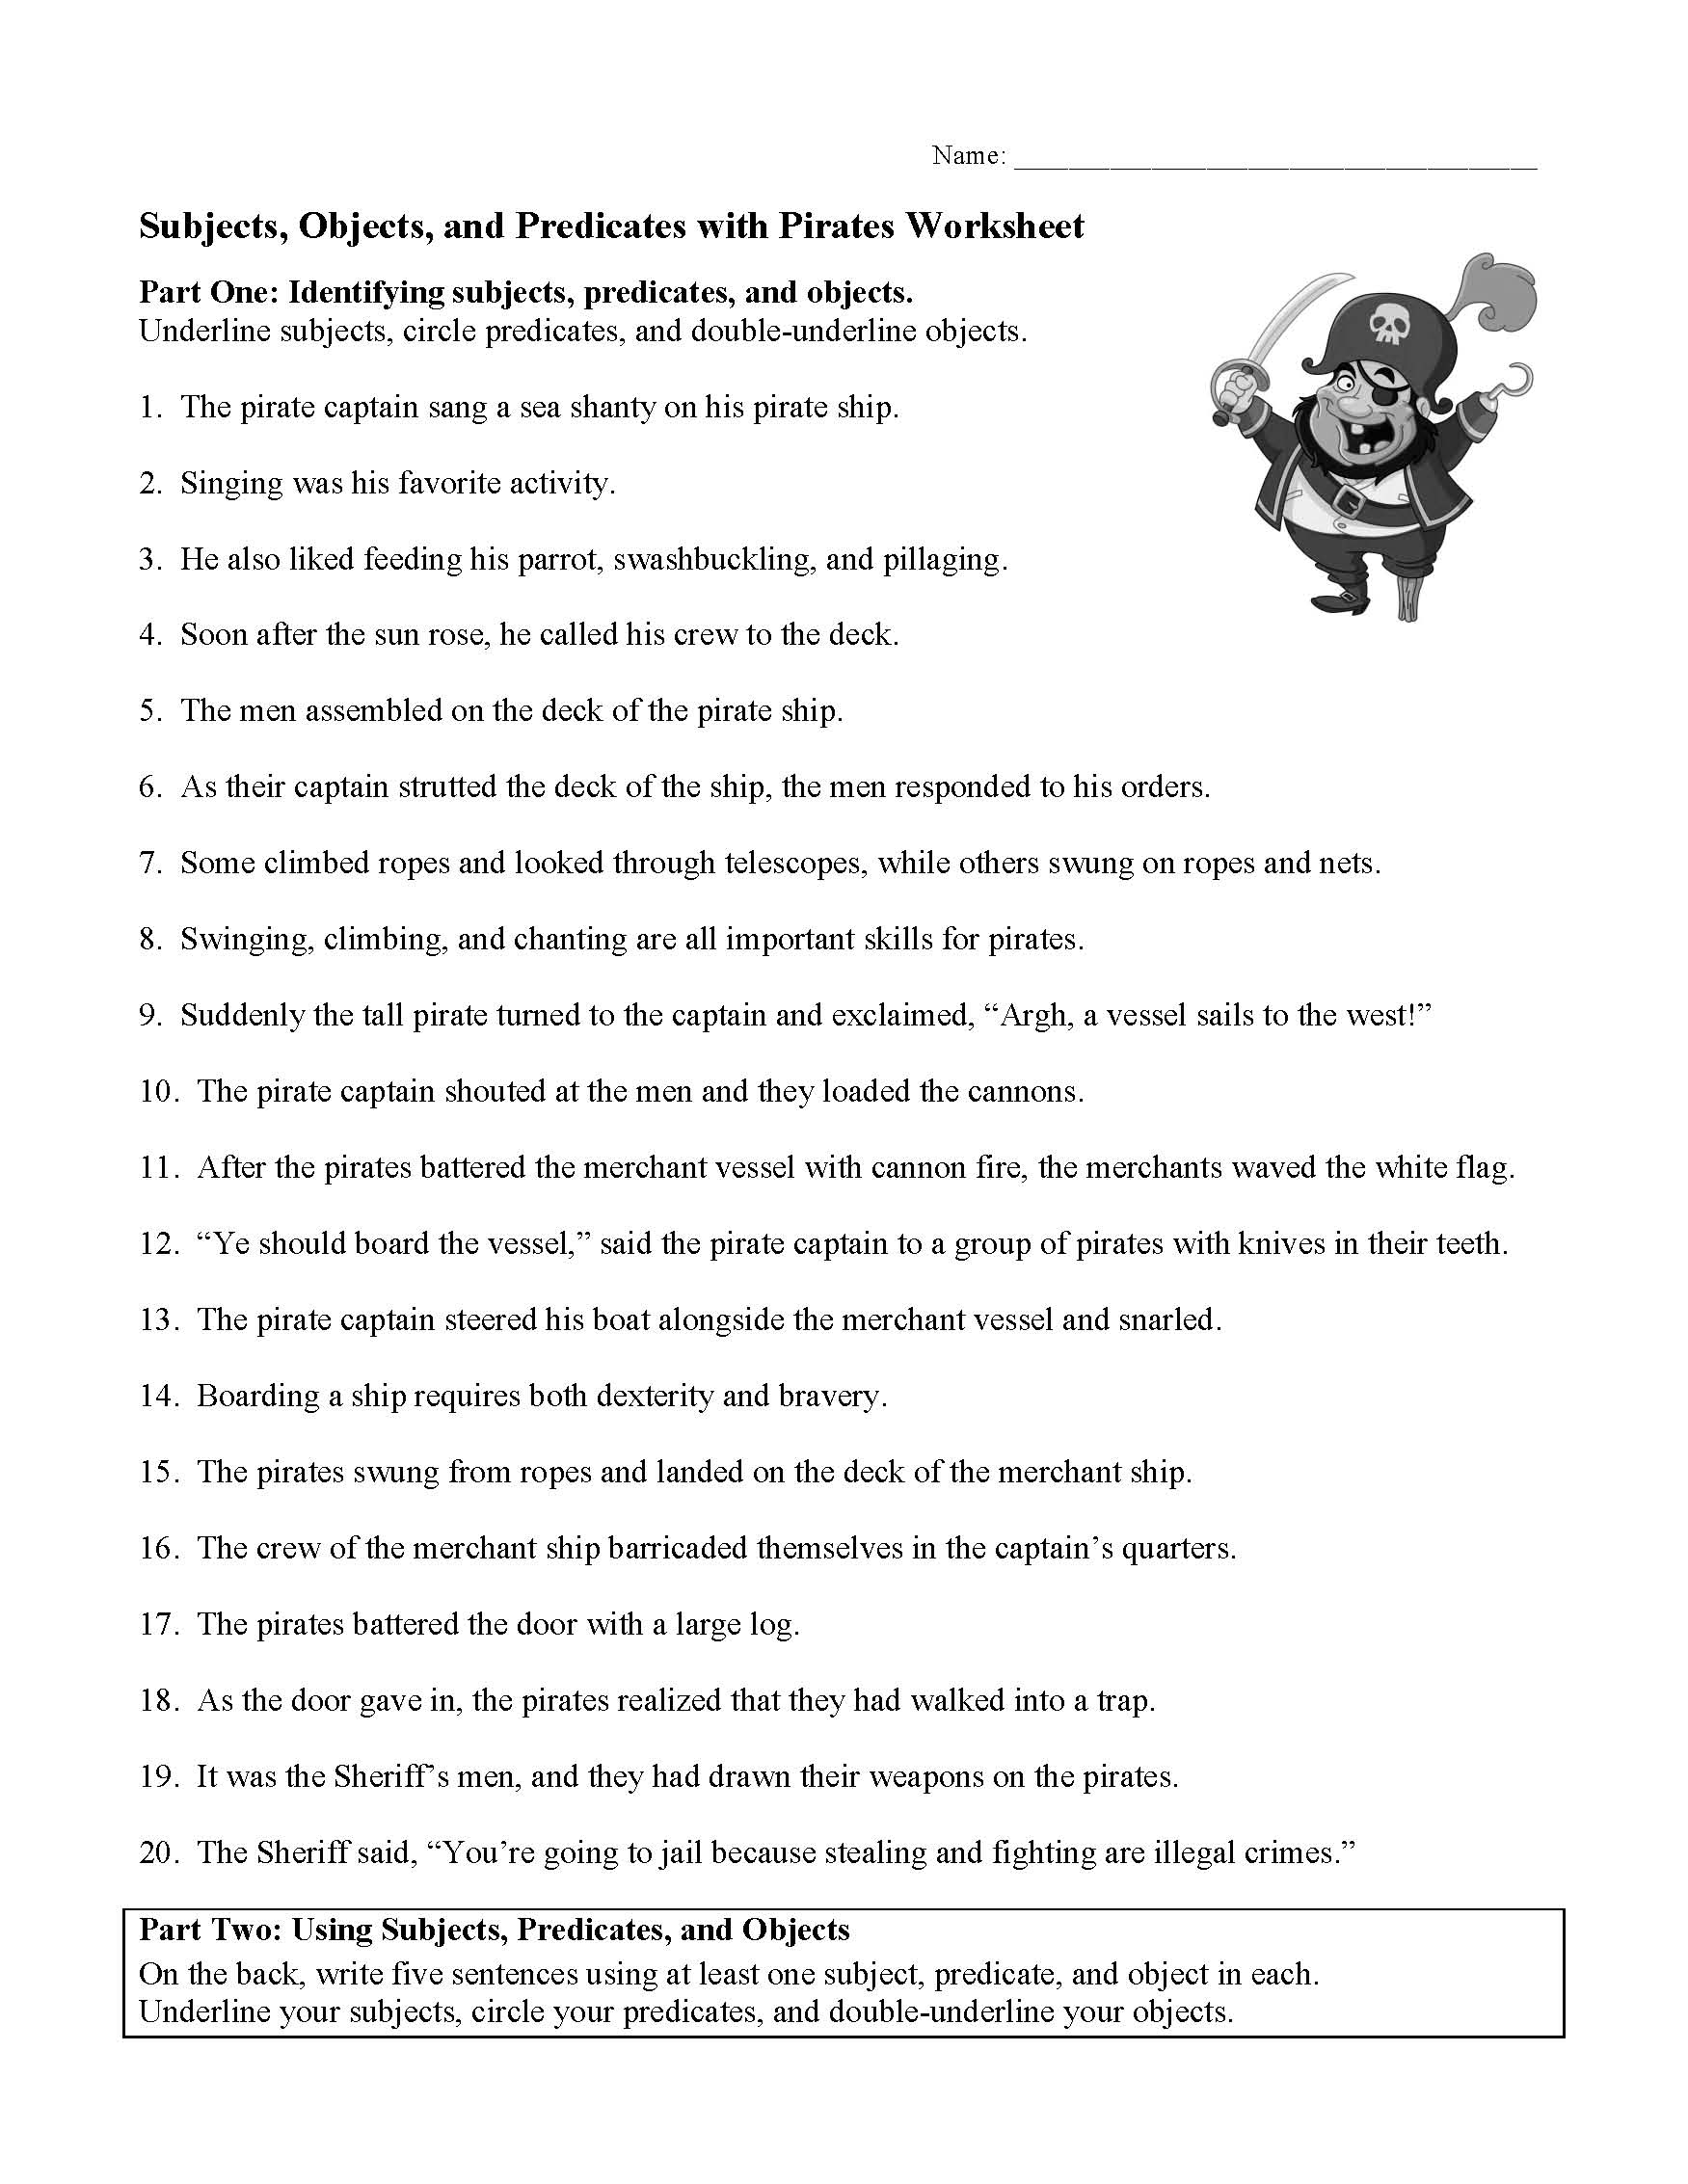 subjects-and-predicates-worksheet